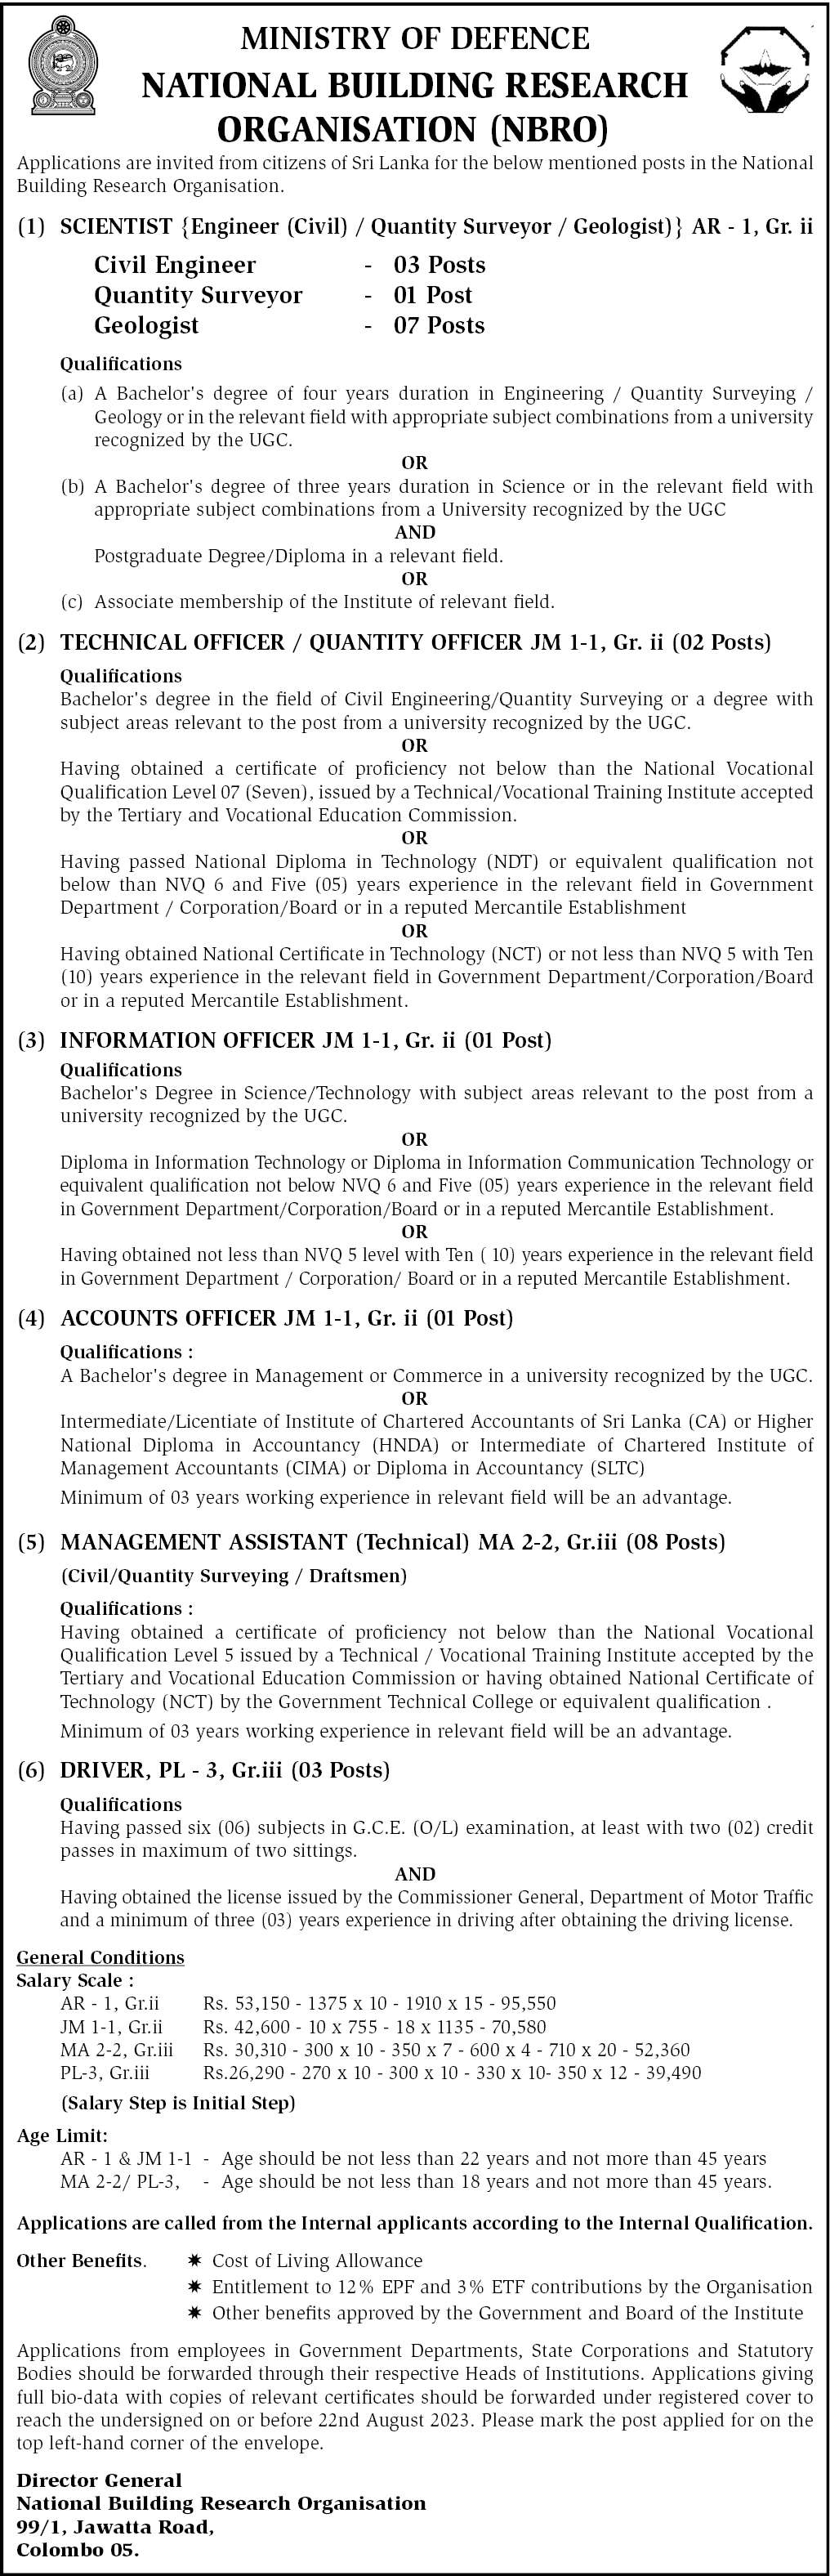 Scientist, Technical Officer- Quantity Officer, information officer, Account officer, Management Assistant, Driver